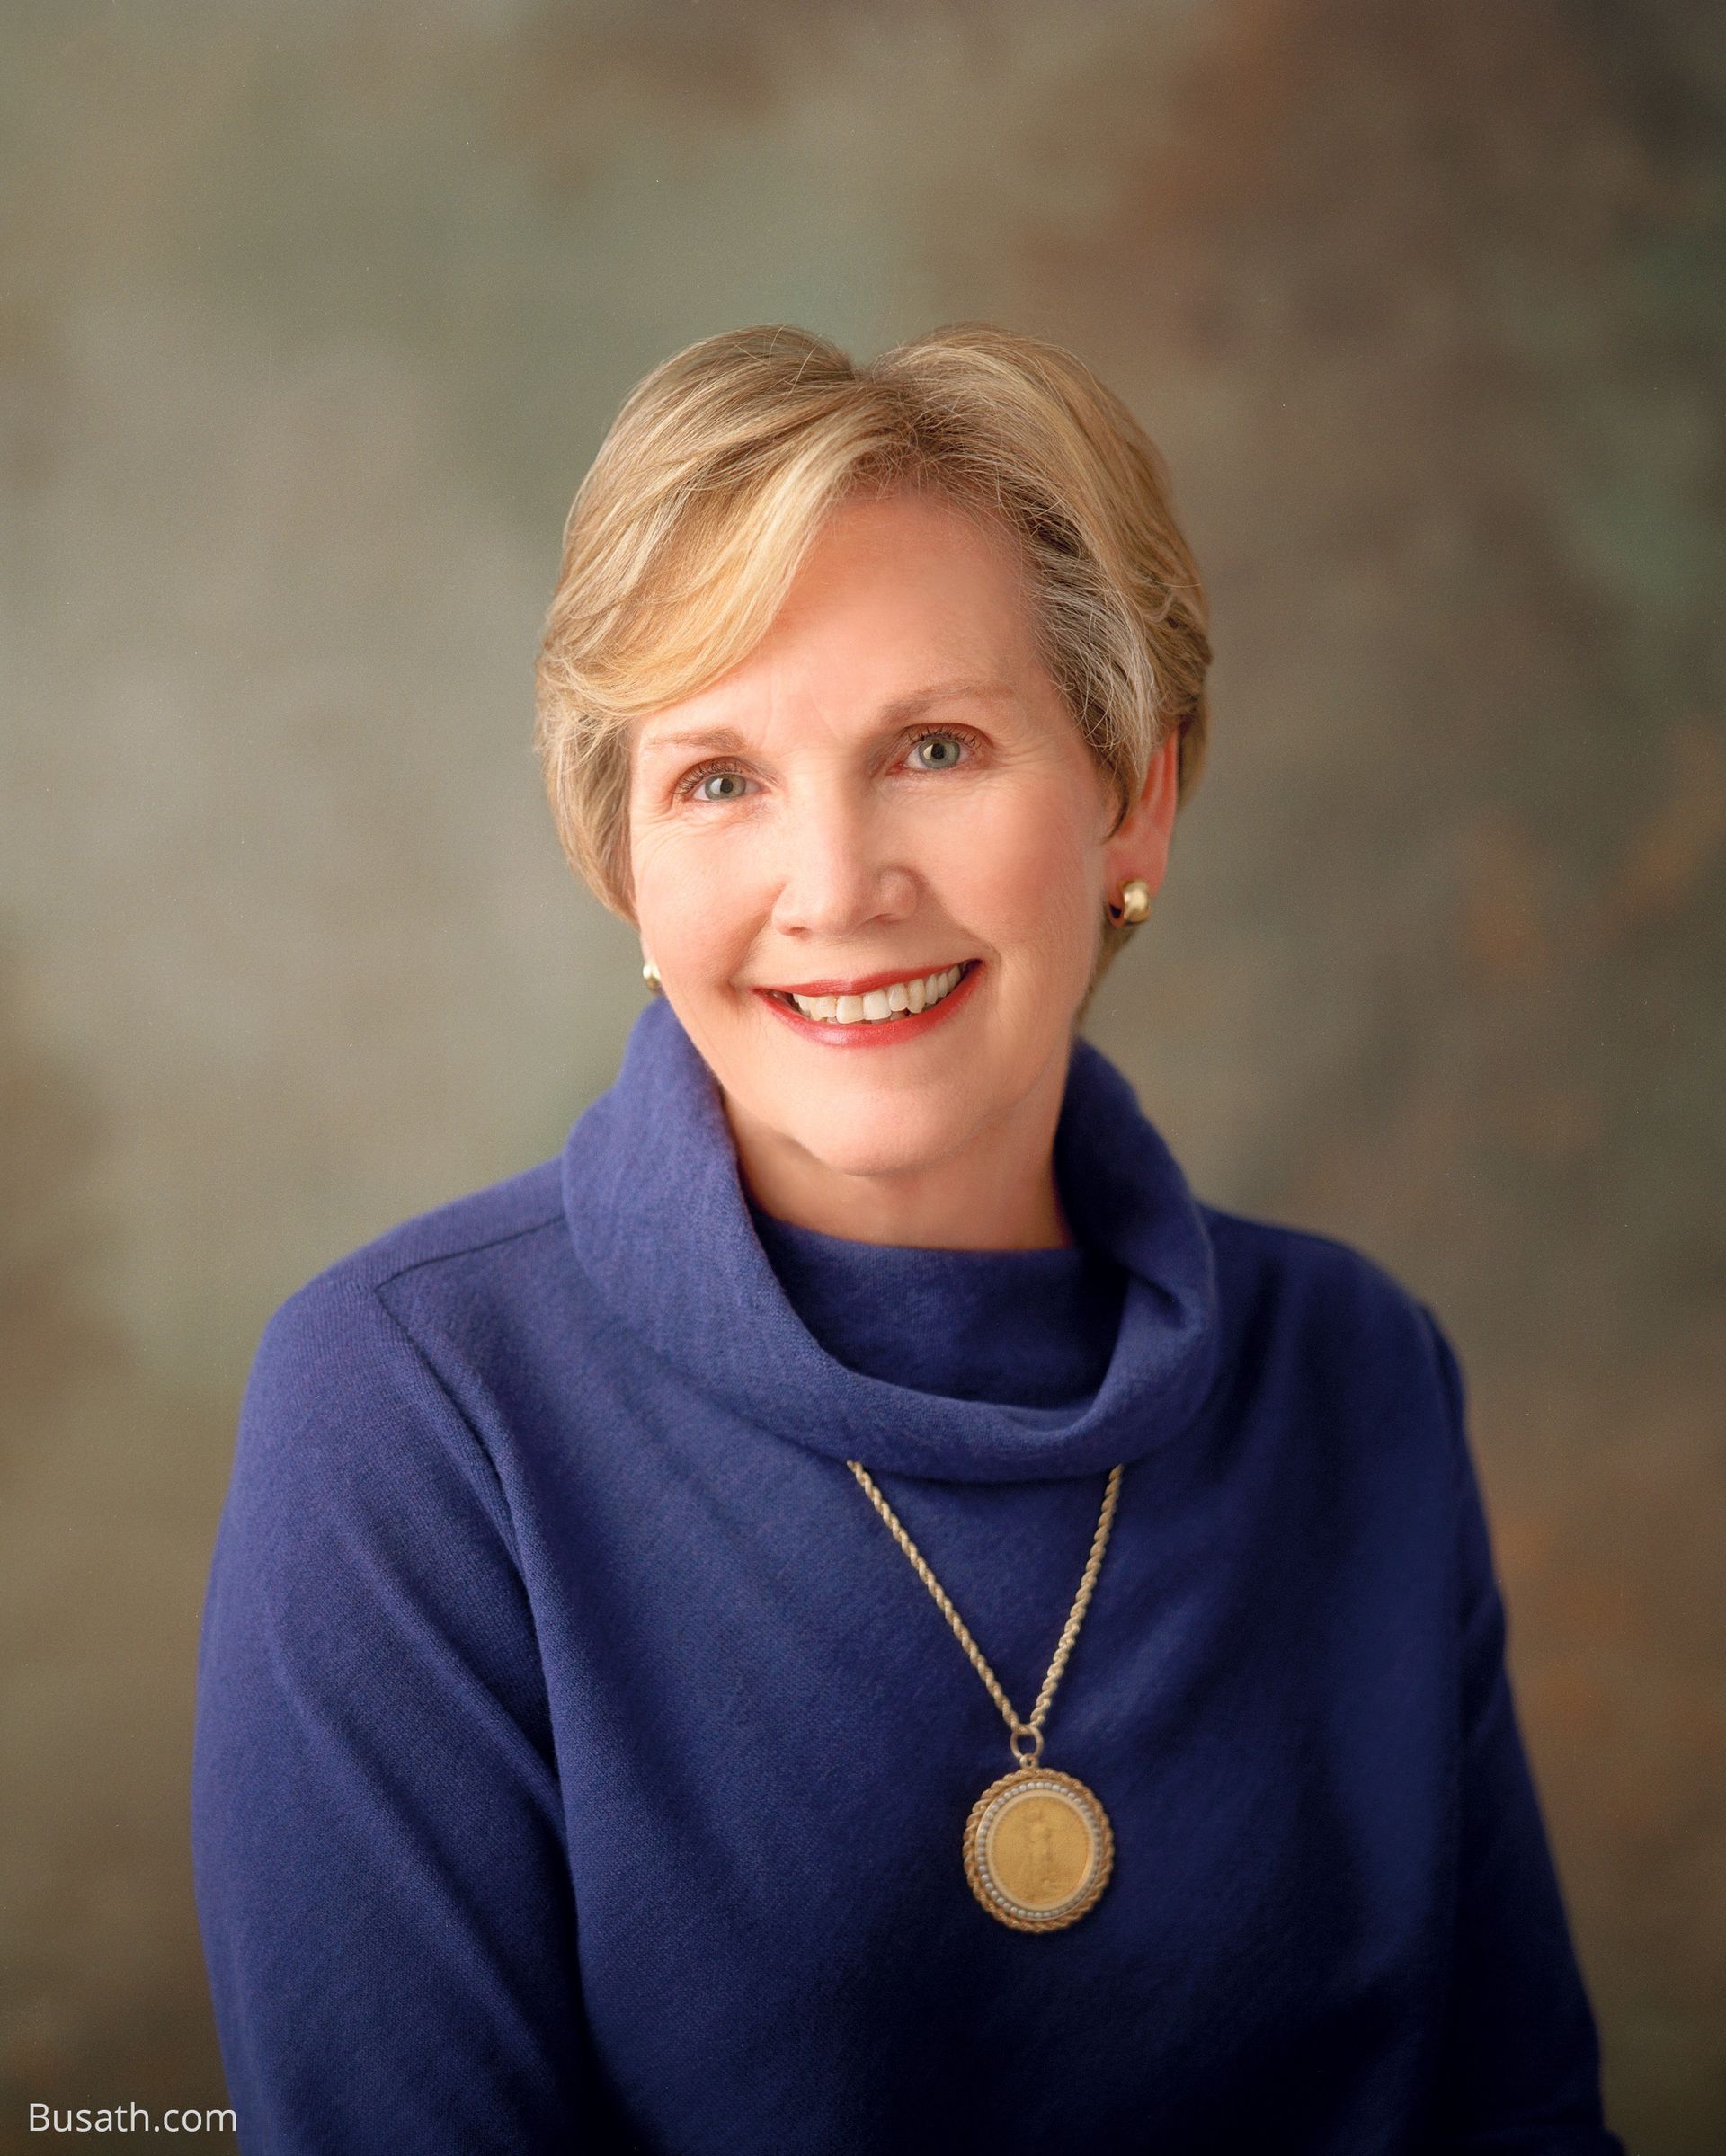 A portrait of Bonnie Dansie Parkin, who served as the 14th general president of the Relief Society from 2002 to 2007.